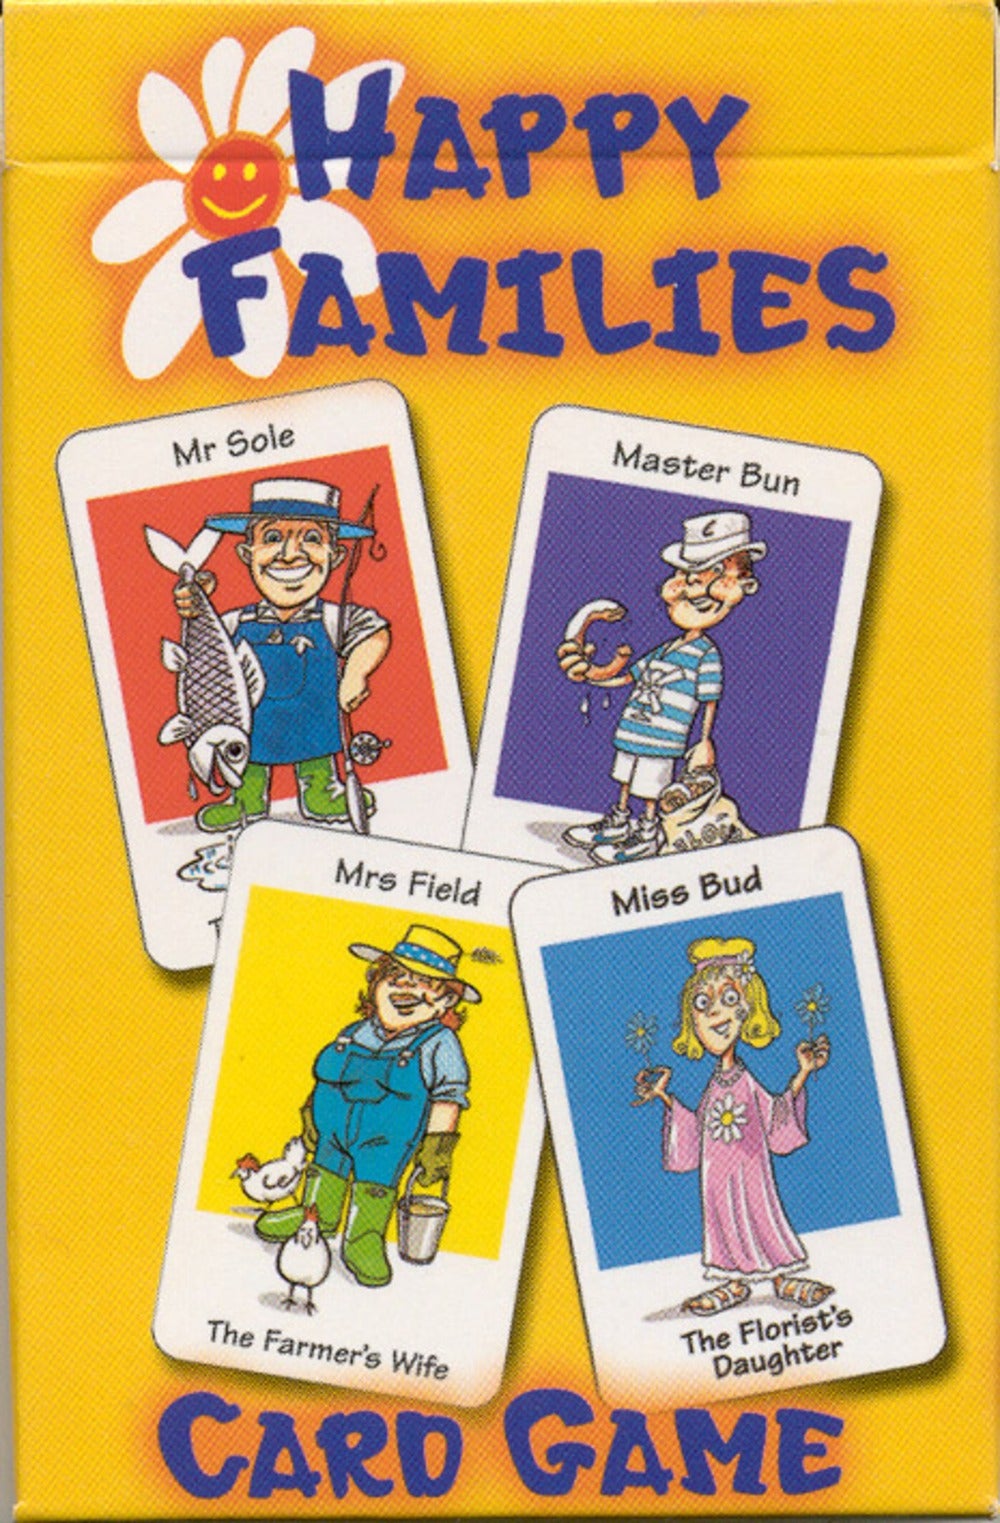 card games for kids